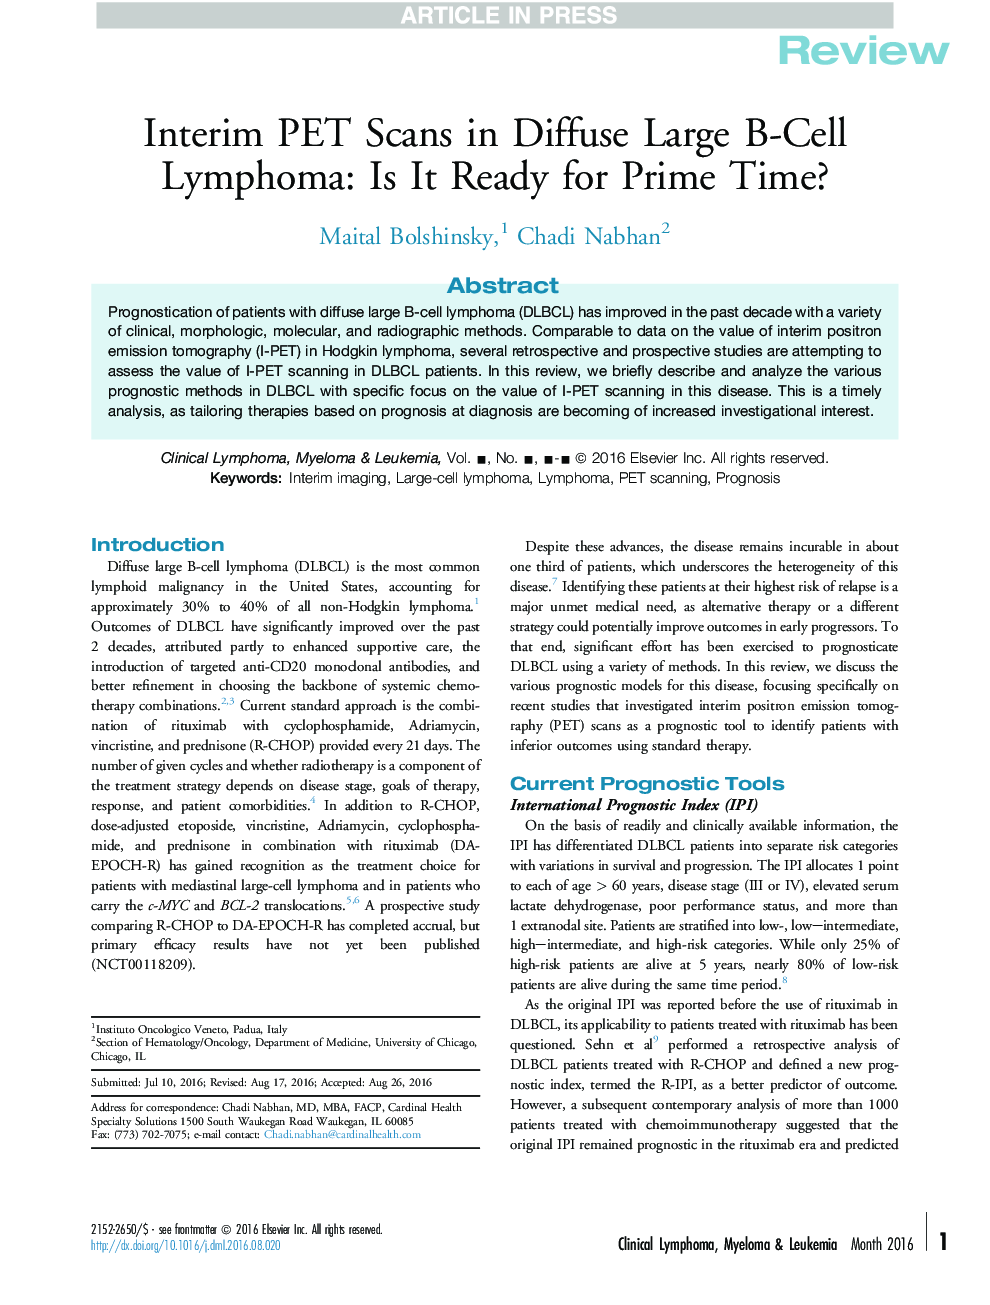 Interim PET Scans in Diffuse Large B-Cell Lymphoma: Is It Ready for Prime Time?